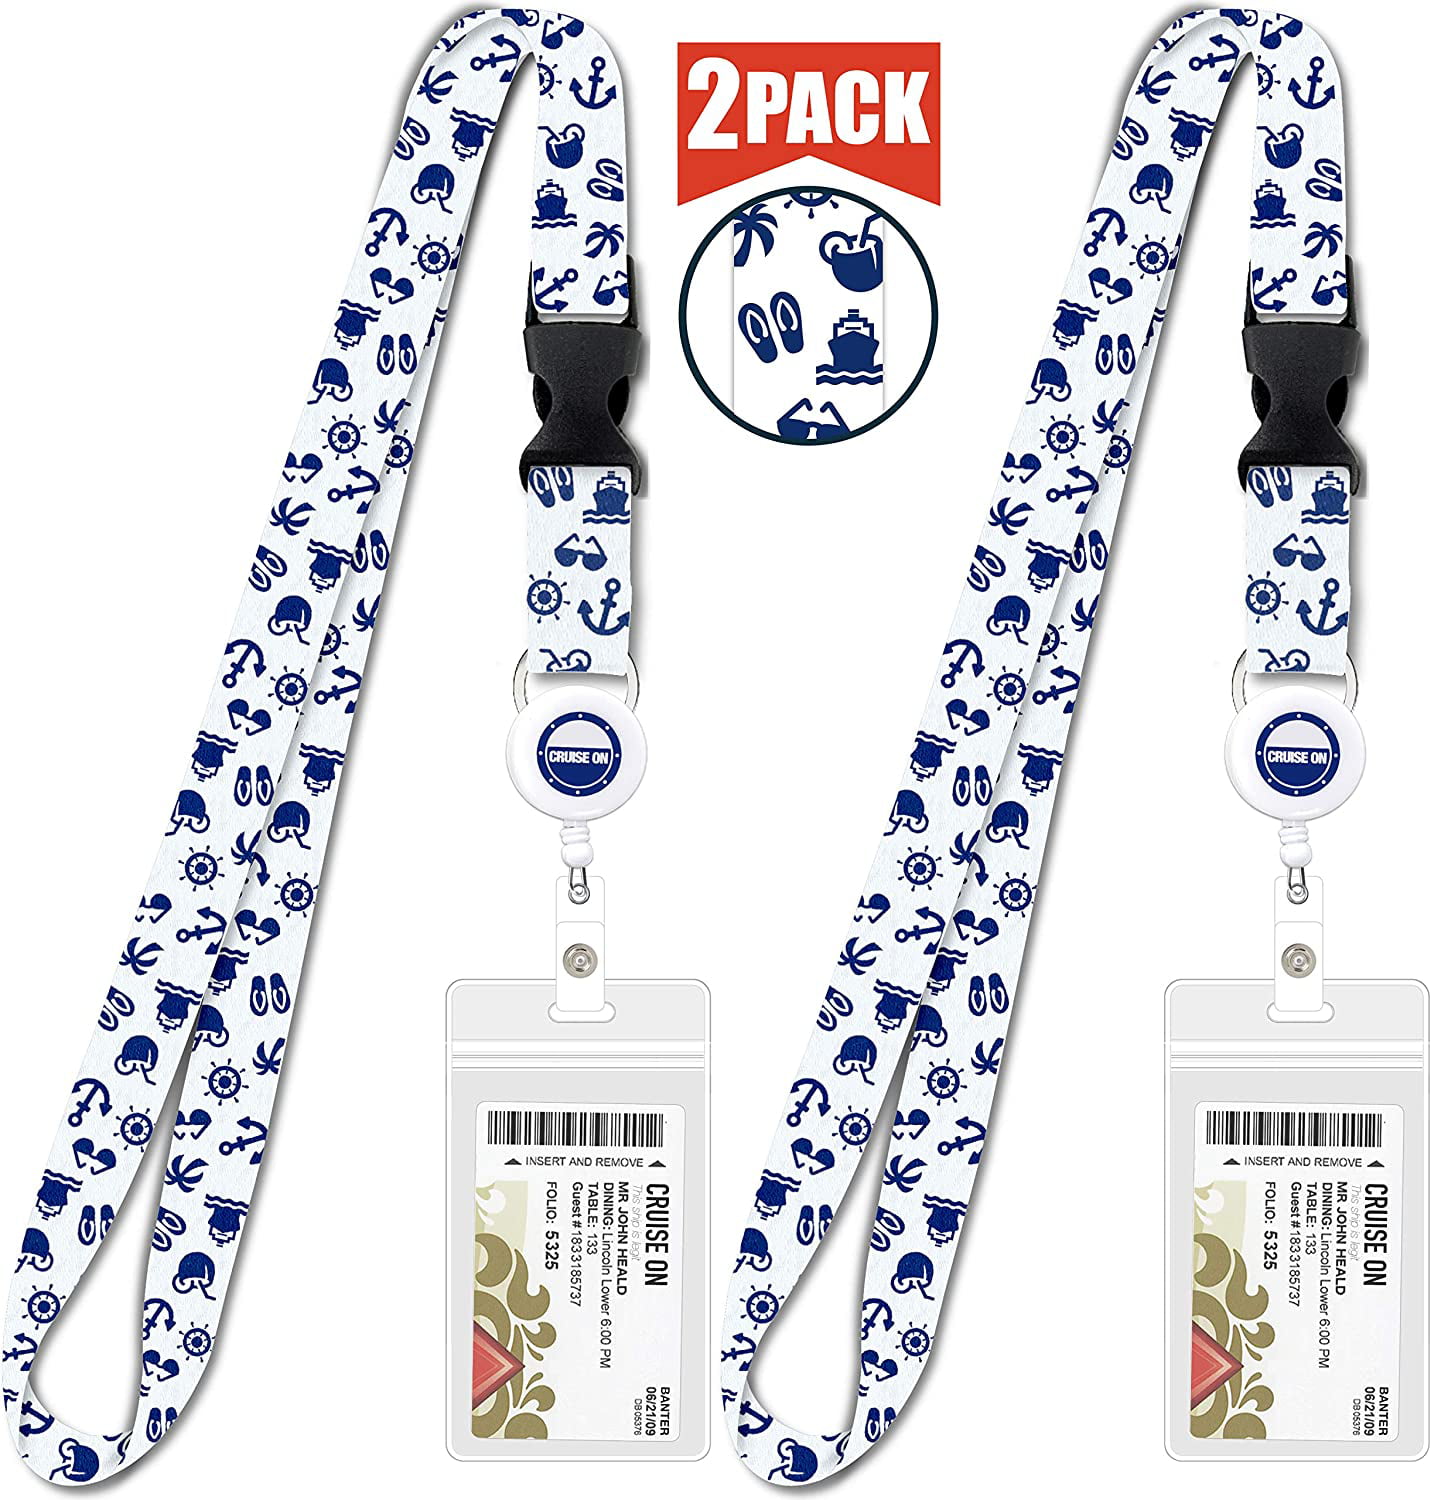 Odds Udfør kommando Cruise Lanyard for Ship Cards | 2 Pack Cruise Lanyards with ID Holder, Key  Card Retractable Badge & Waterproof Ship Card Holders - Walmart.com